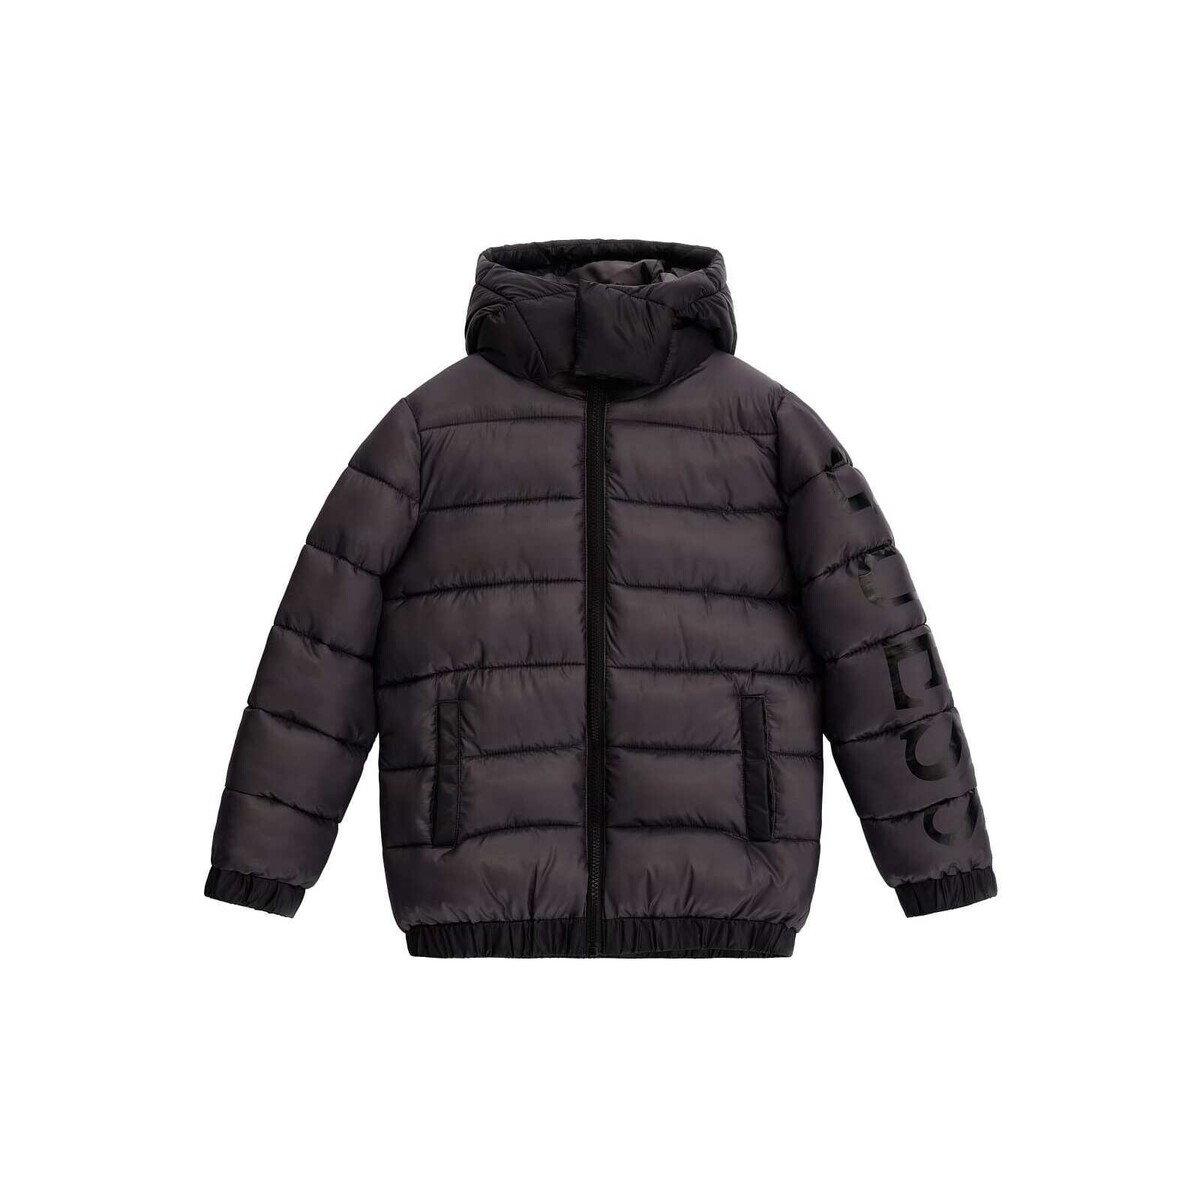 Guess L3BL10 Grey - Free delivery | Spartoo NET ! - Clothing Duffel coats  Child | Shirts